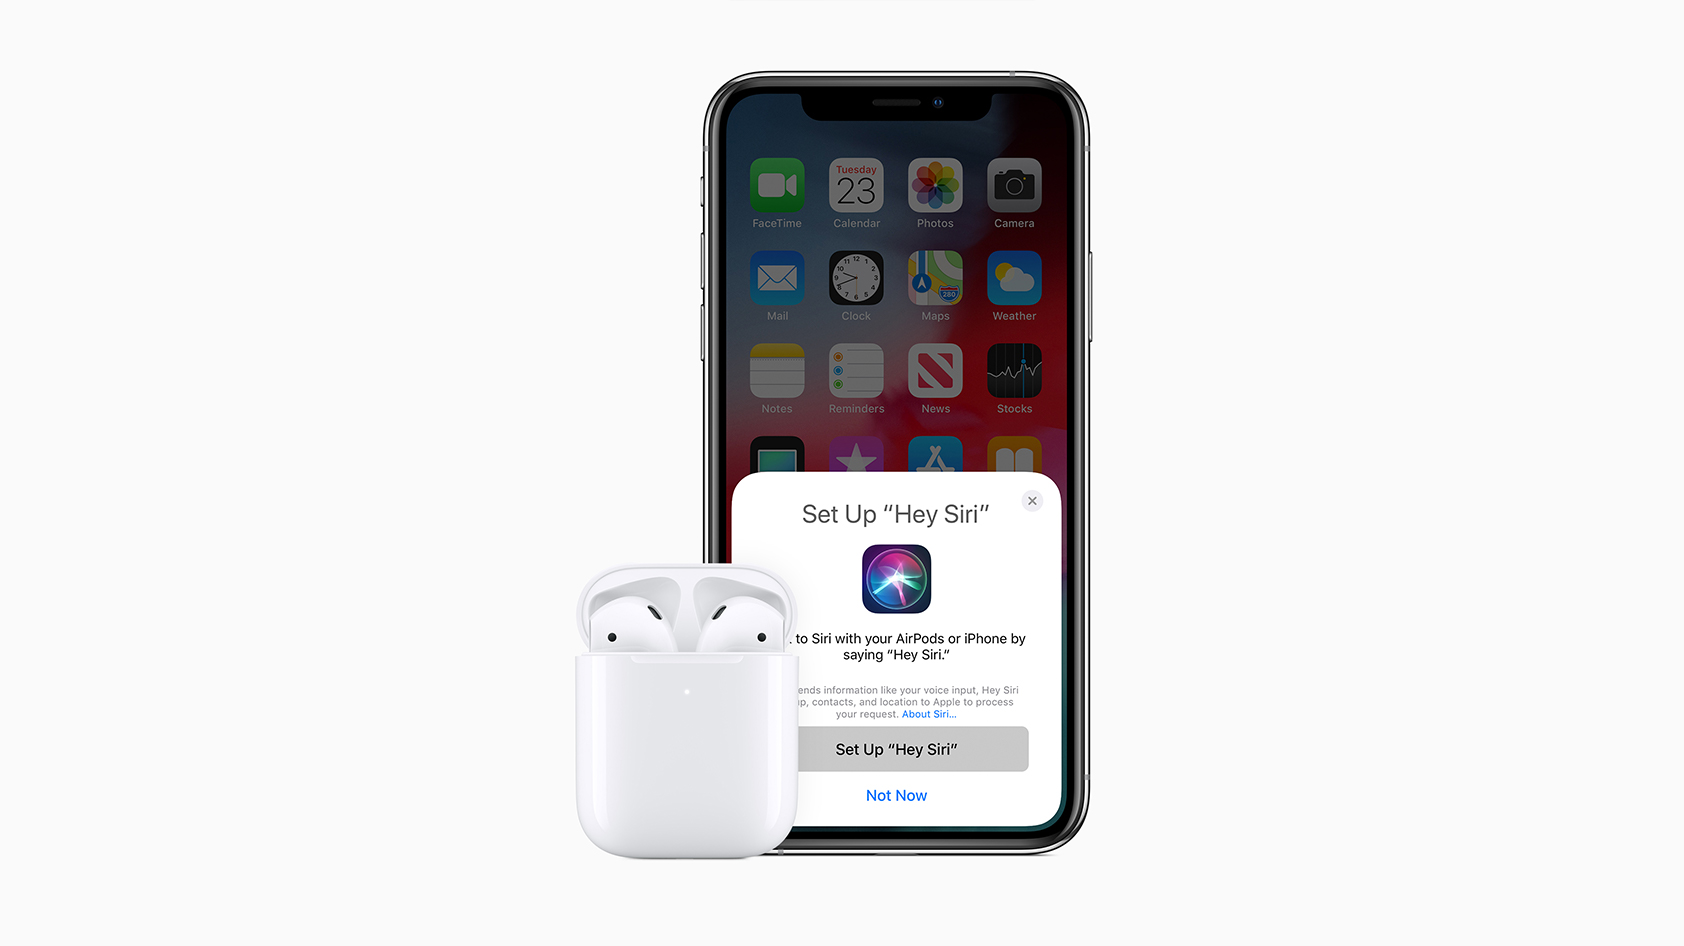 Second generation AirPods against an iPhone with Siri pulled up on the screen.